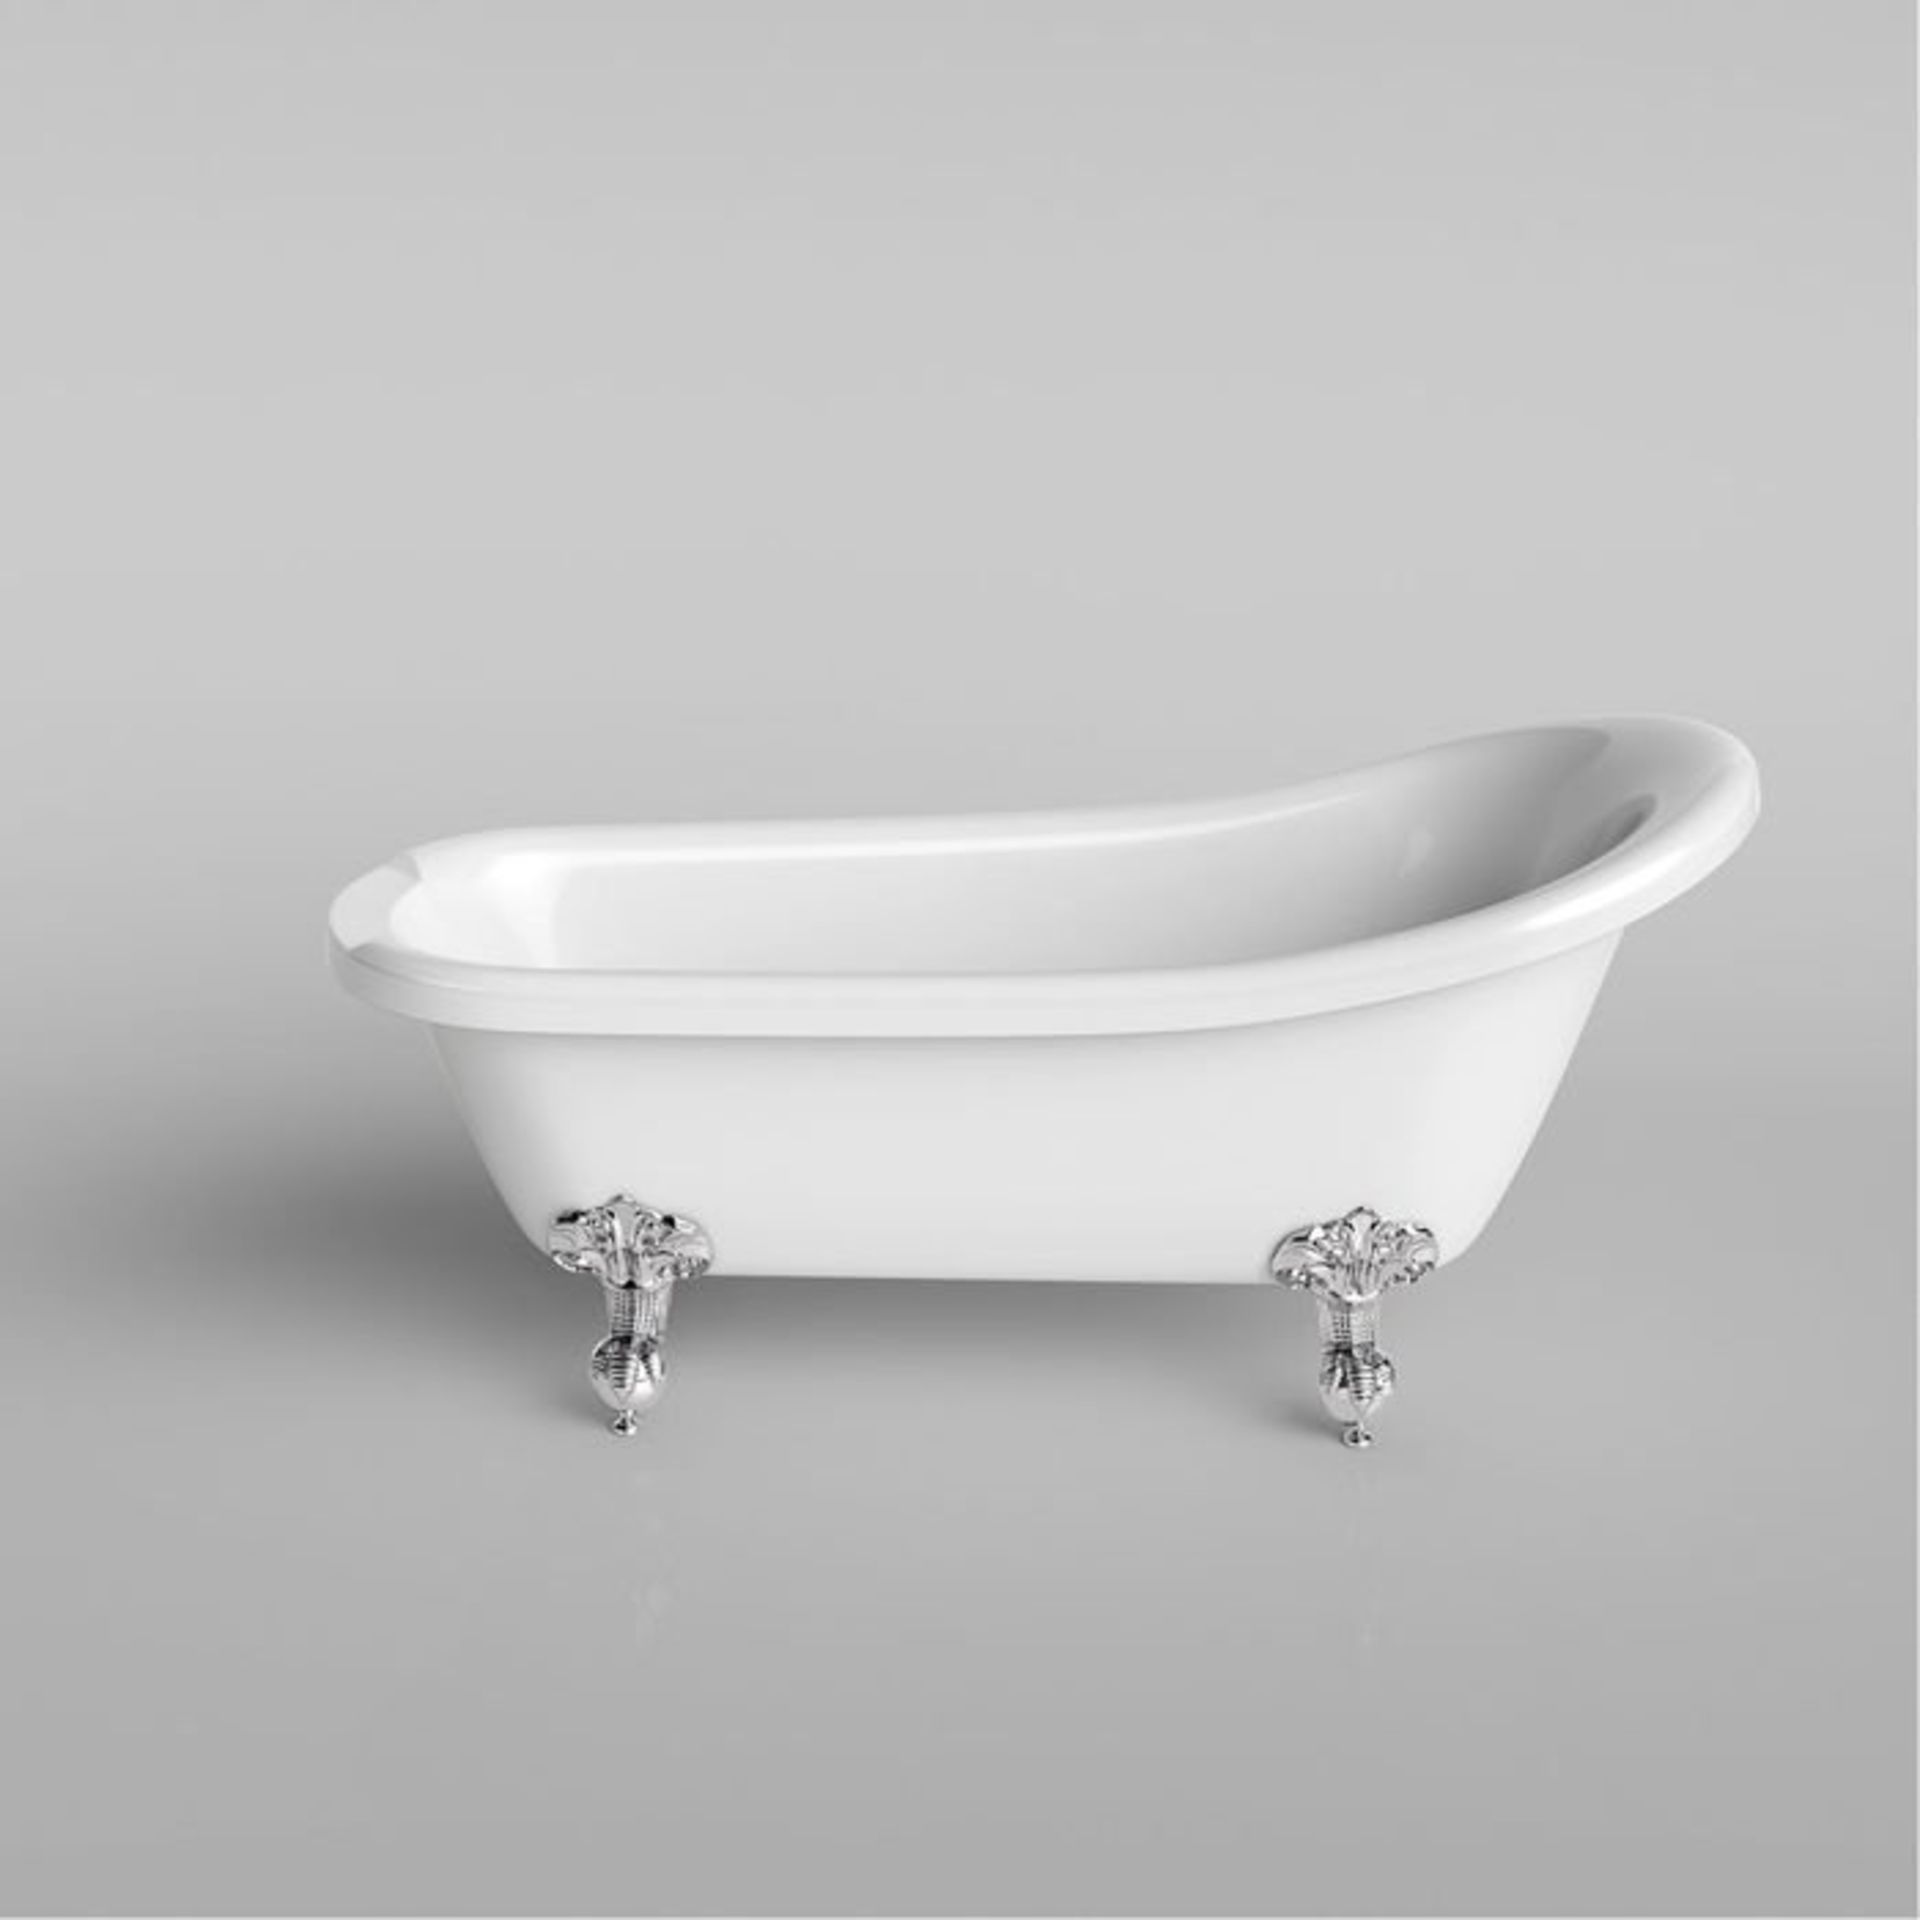 (G199) 1720mm Victoria Traditional Roll Top Slipper Bath - Ball Feet - Large. RRP £799.99. Our - Image 4 of 4